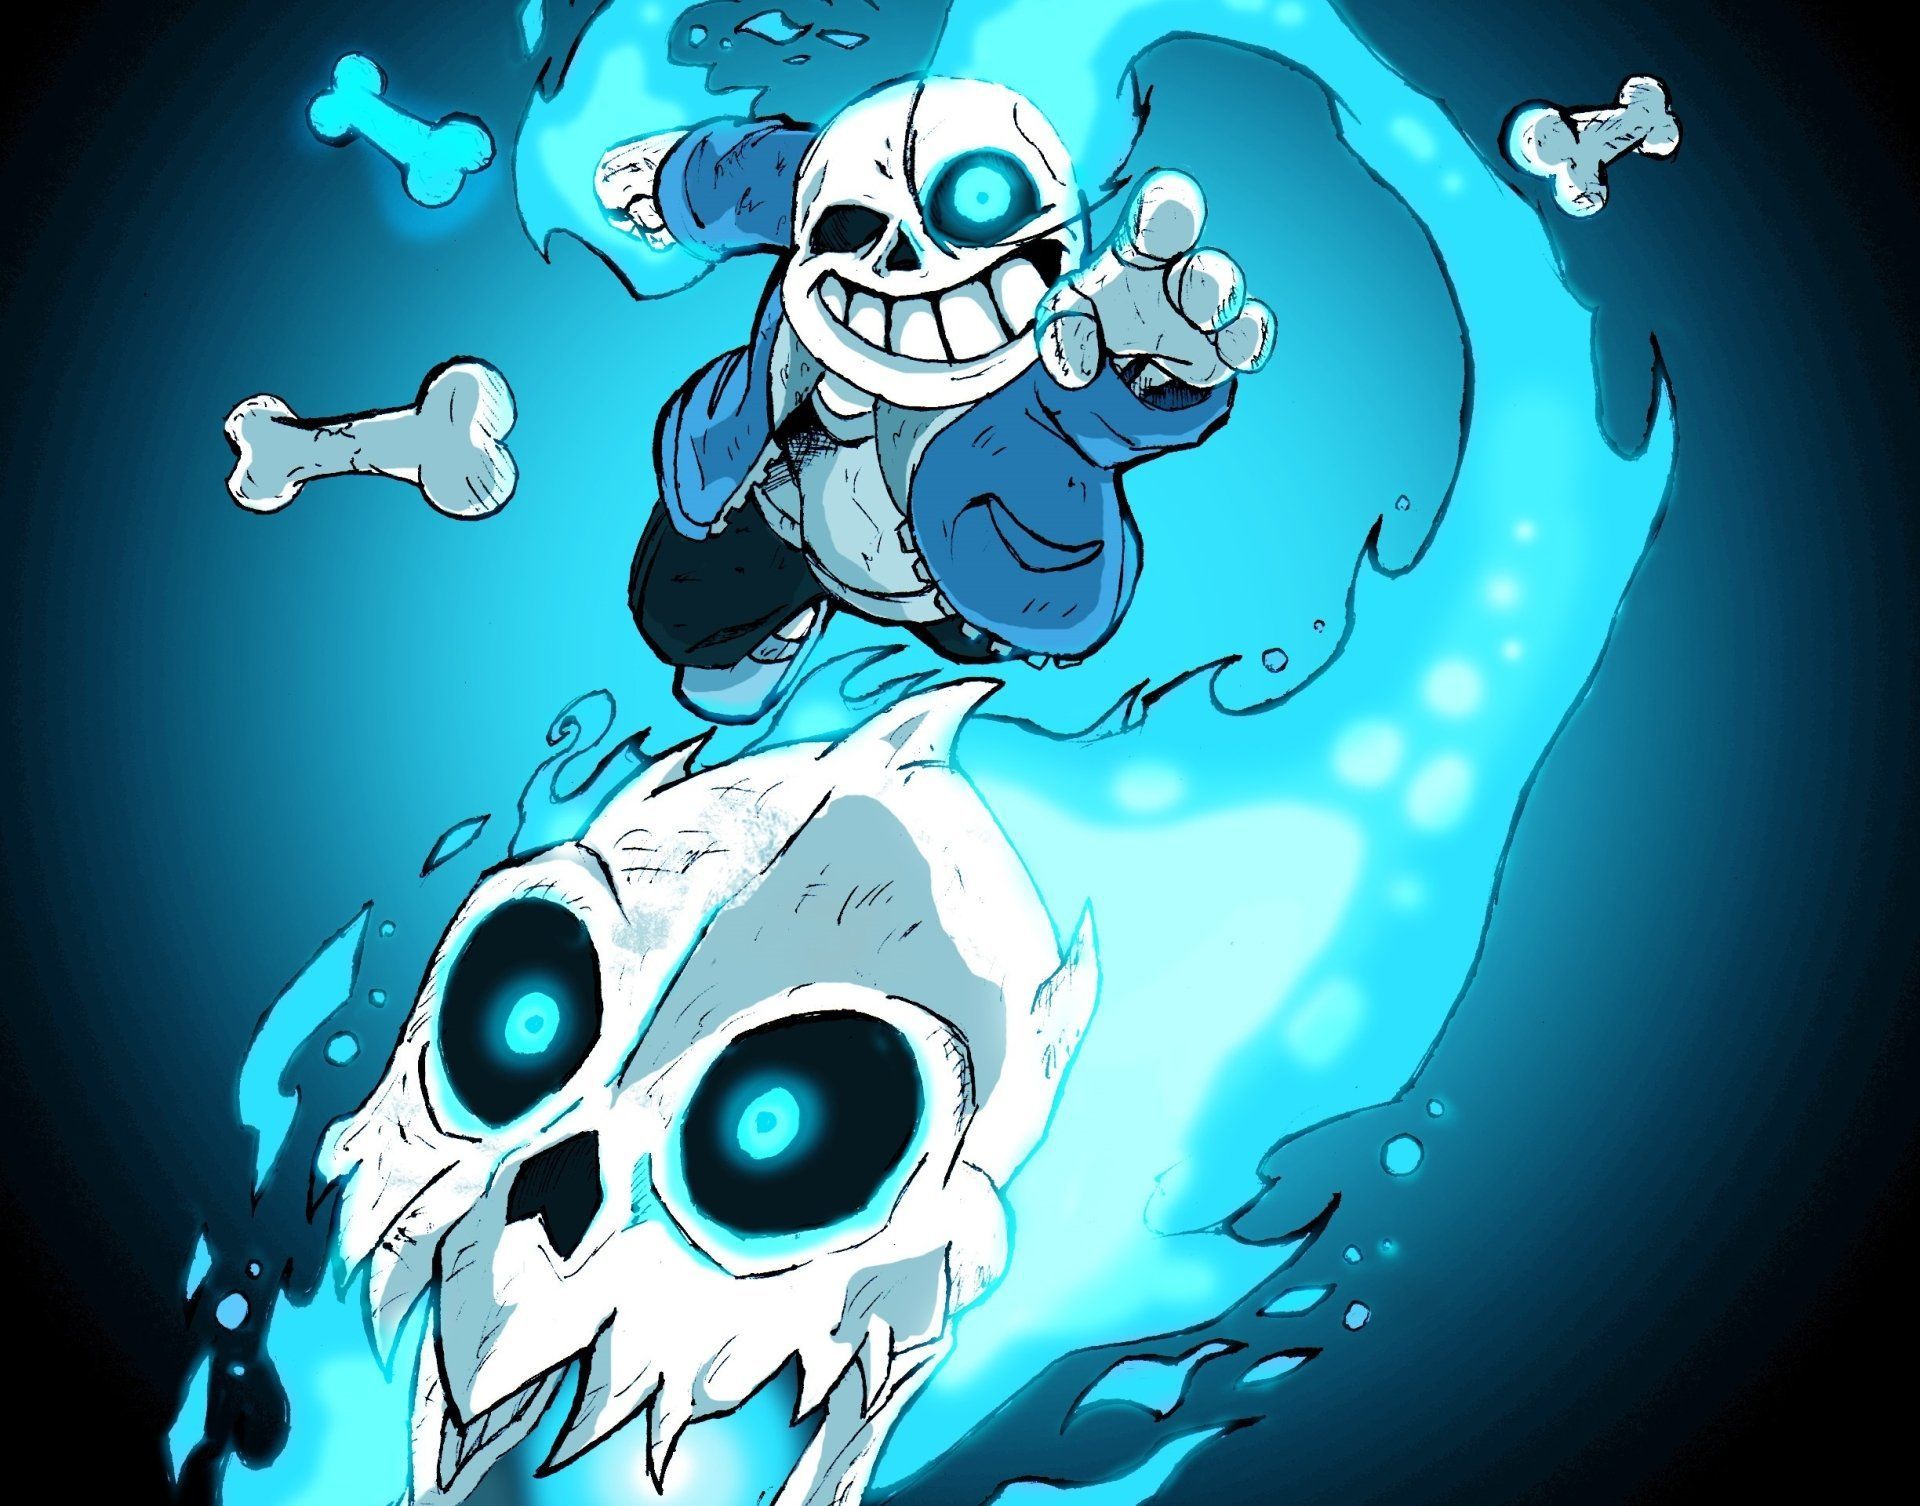 Sans Wallpaper Background Image. View, download, comment, and rate. Undertale, Anime, Undertale art